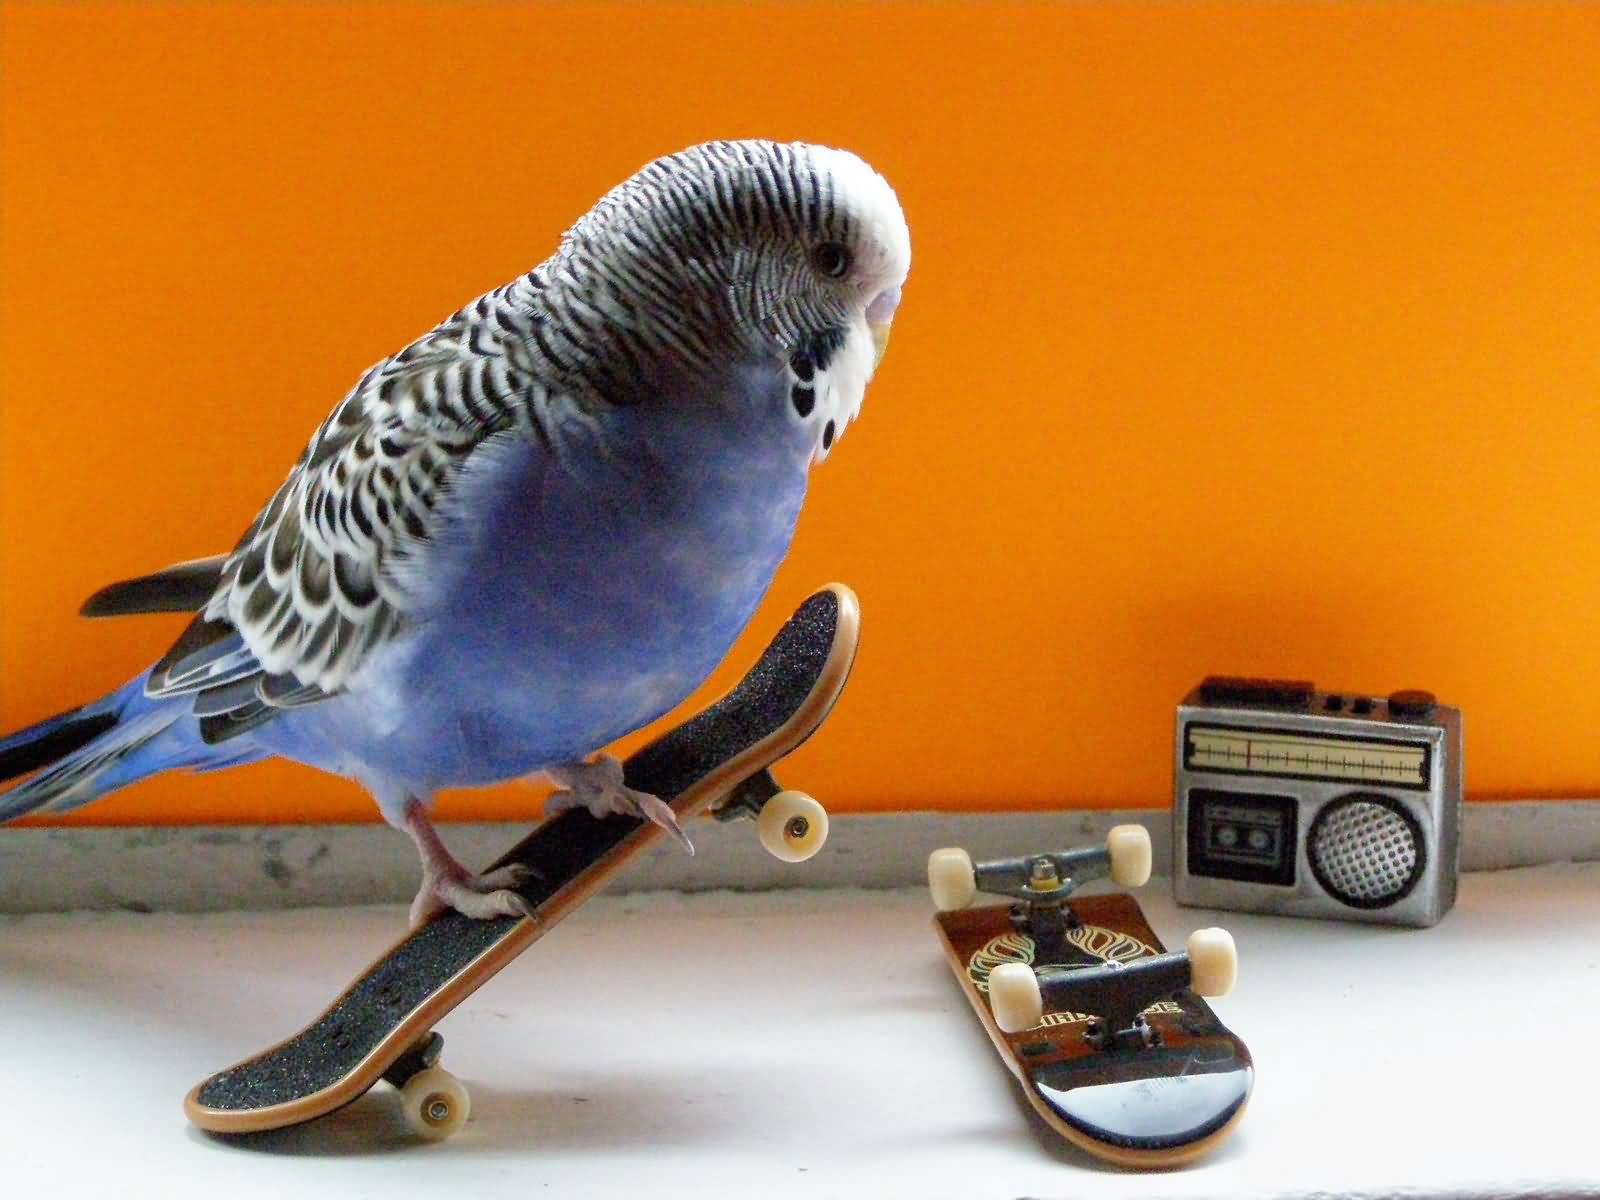 27 Most Funny Skateboarding Pictures